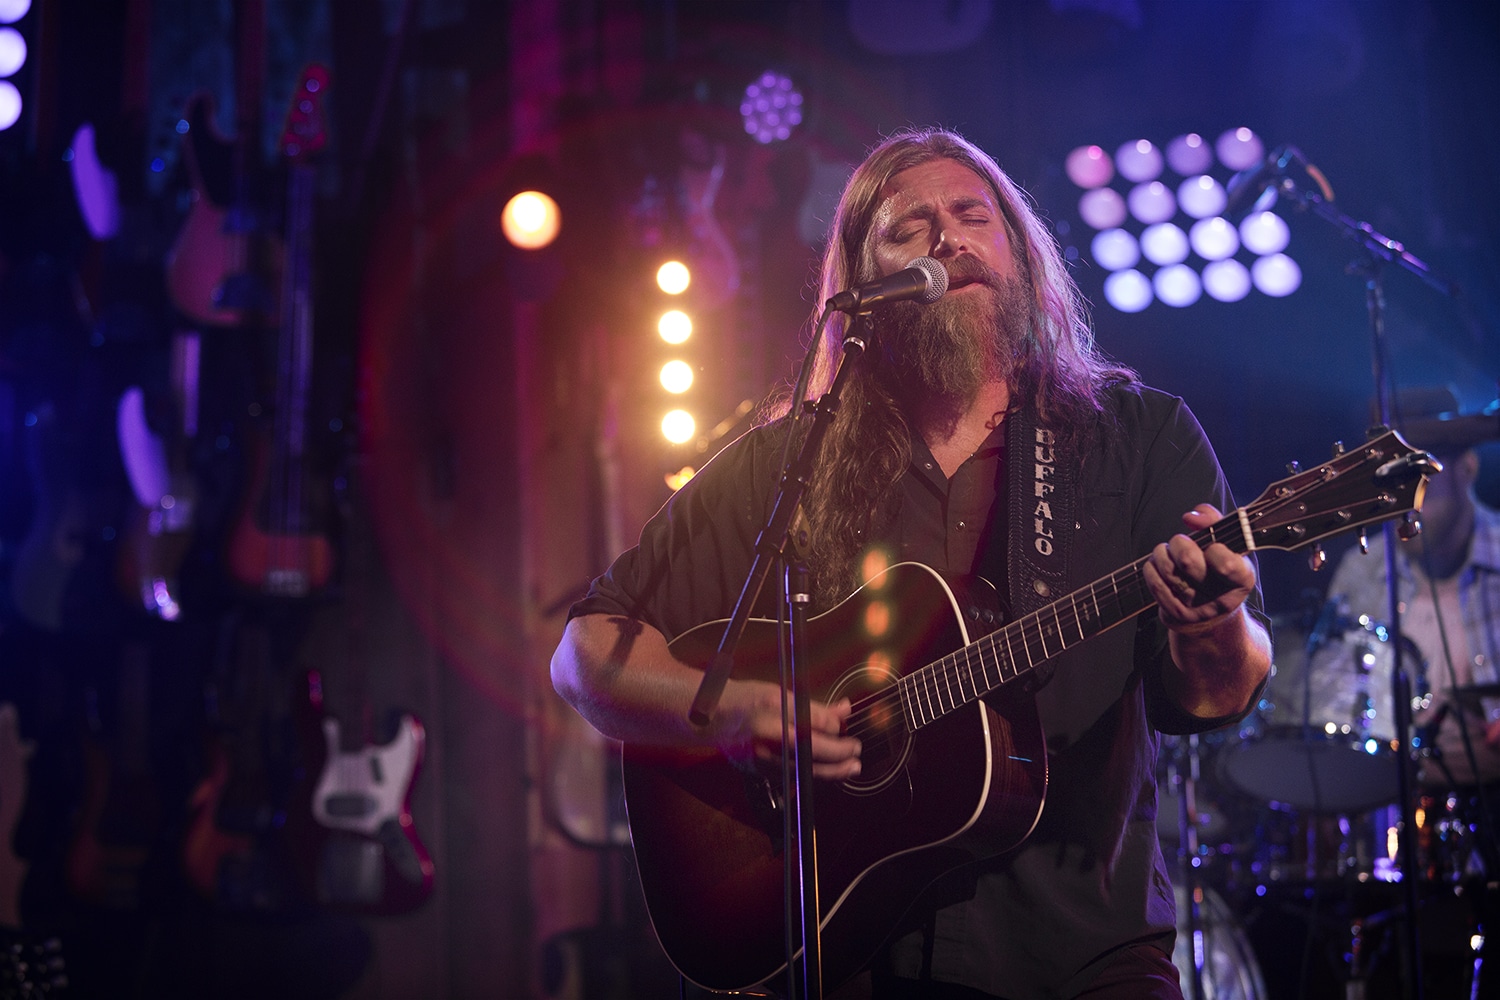 Premiere: The White Buffalo’s “Wish It Was True” from Guitar Center Sessions